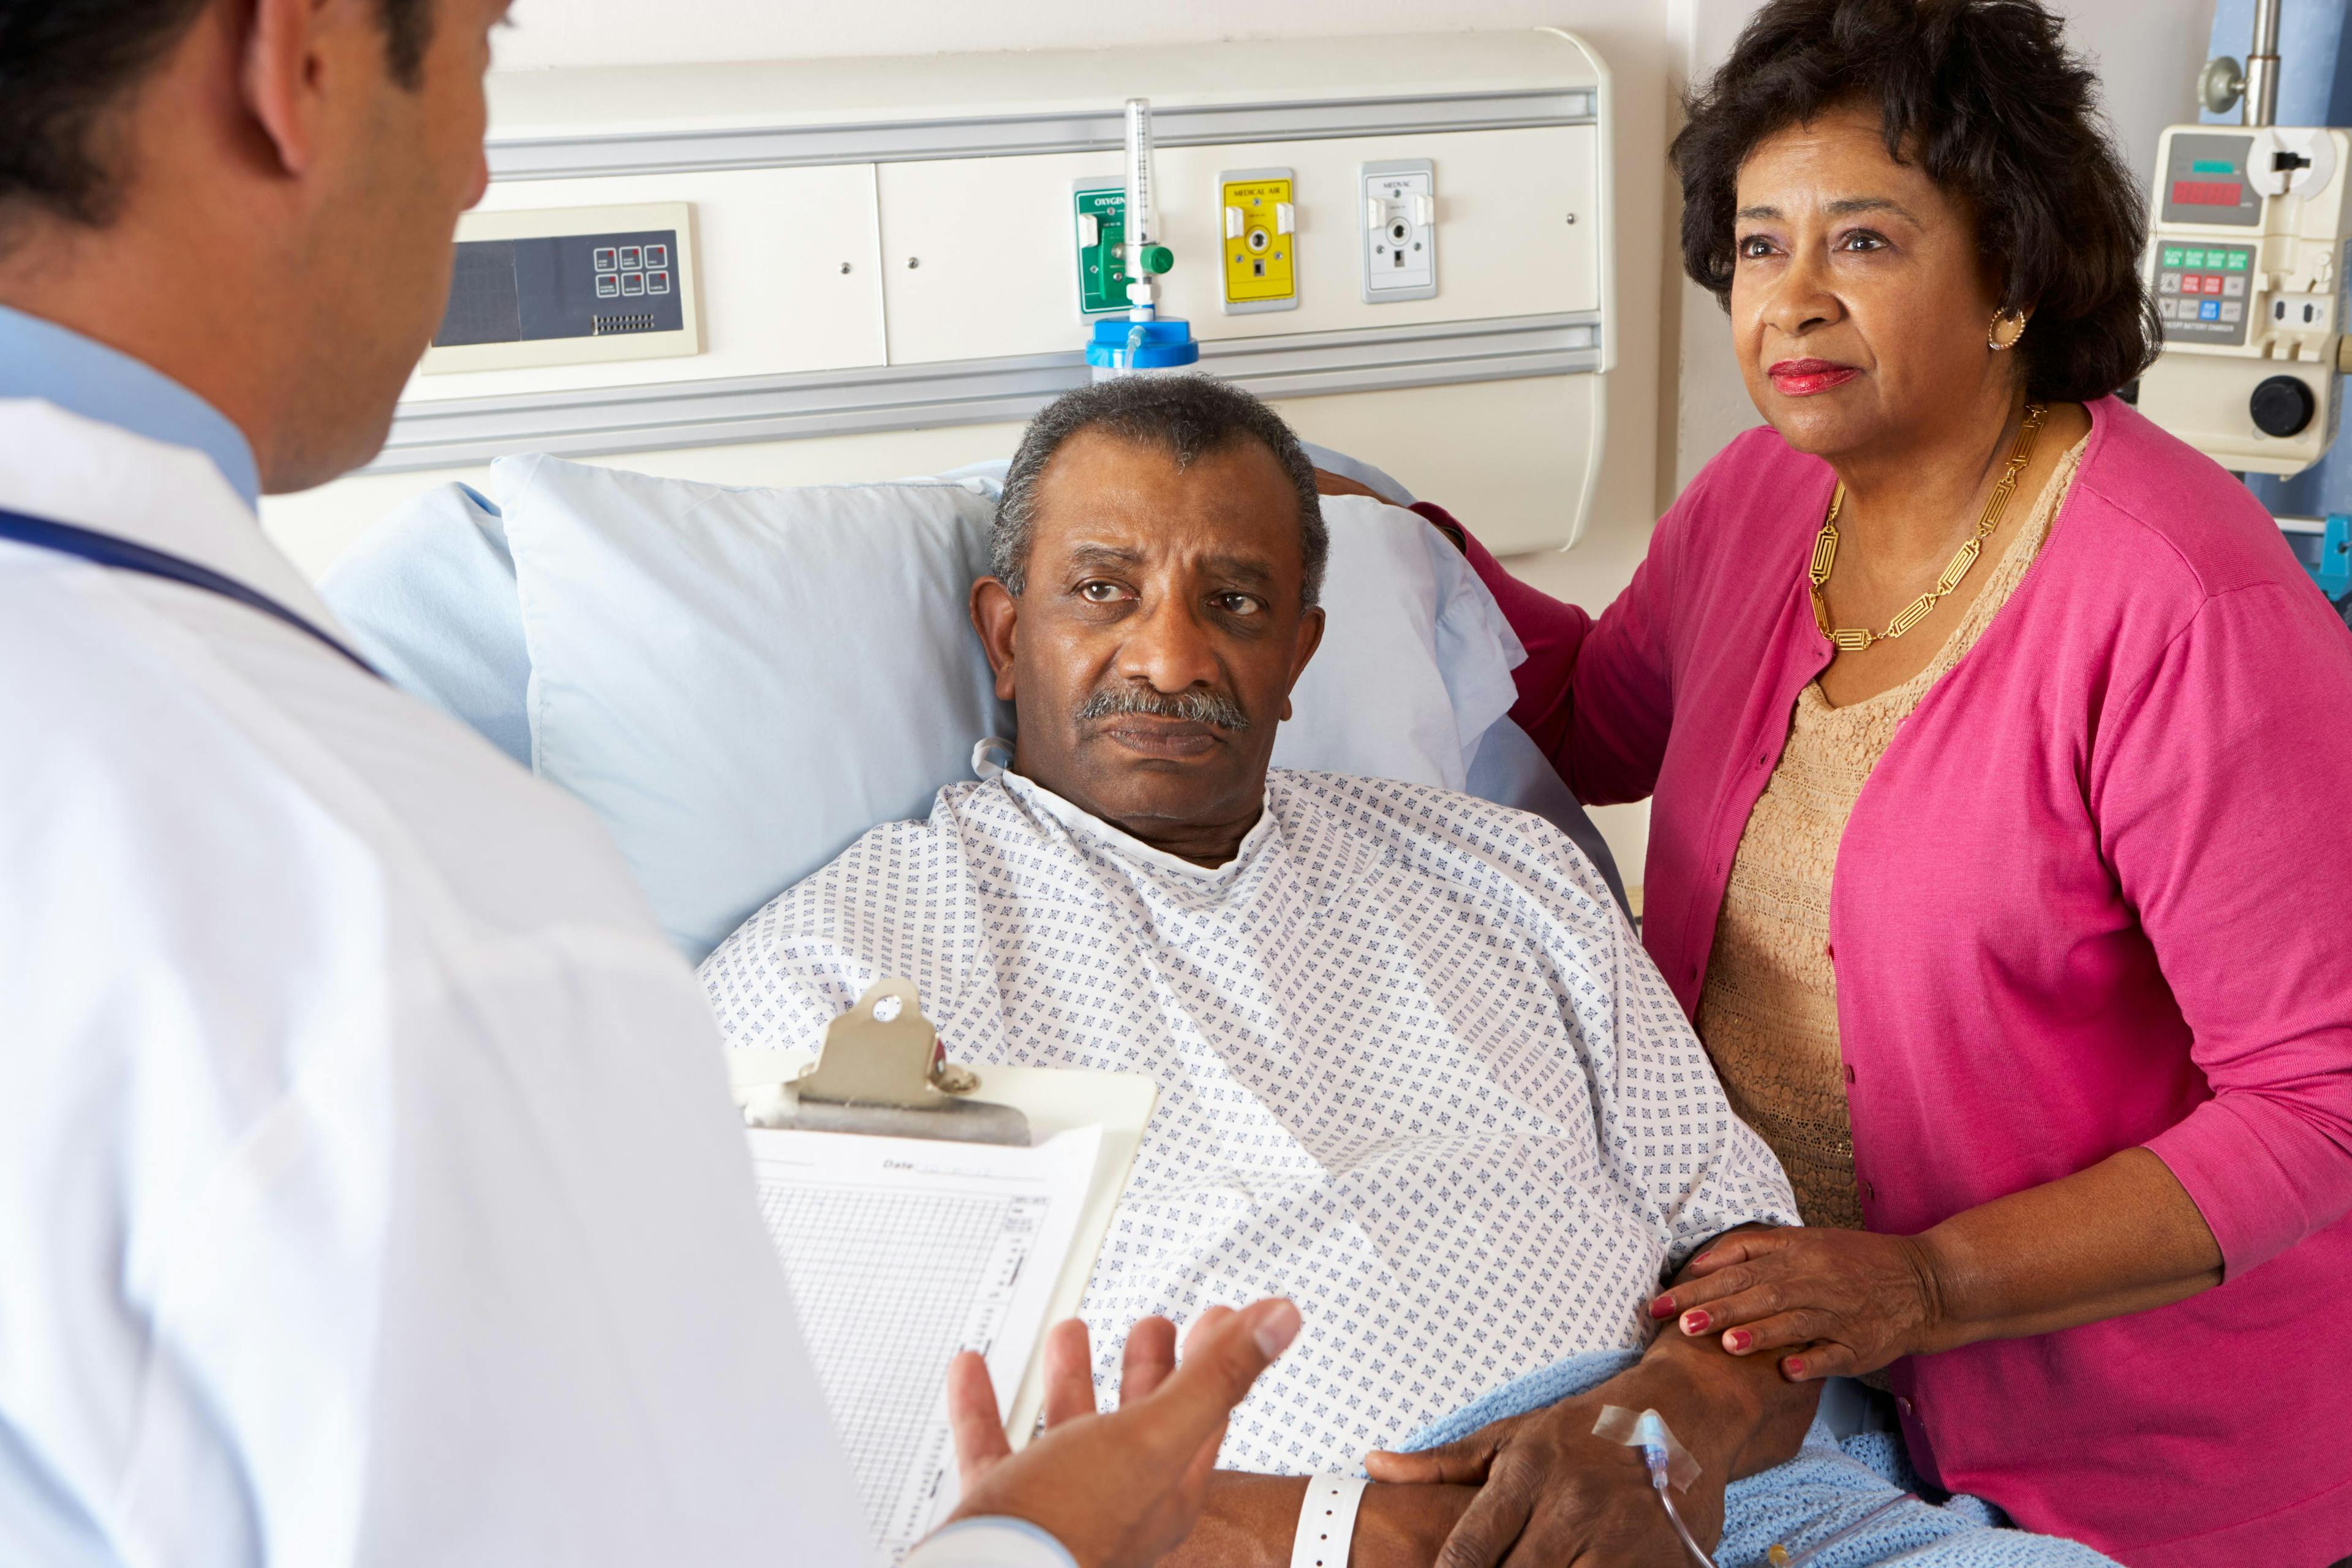 Doctor talks with a black patient experiencing diabetic ketoacidosis.